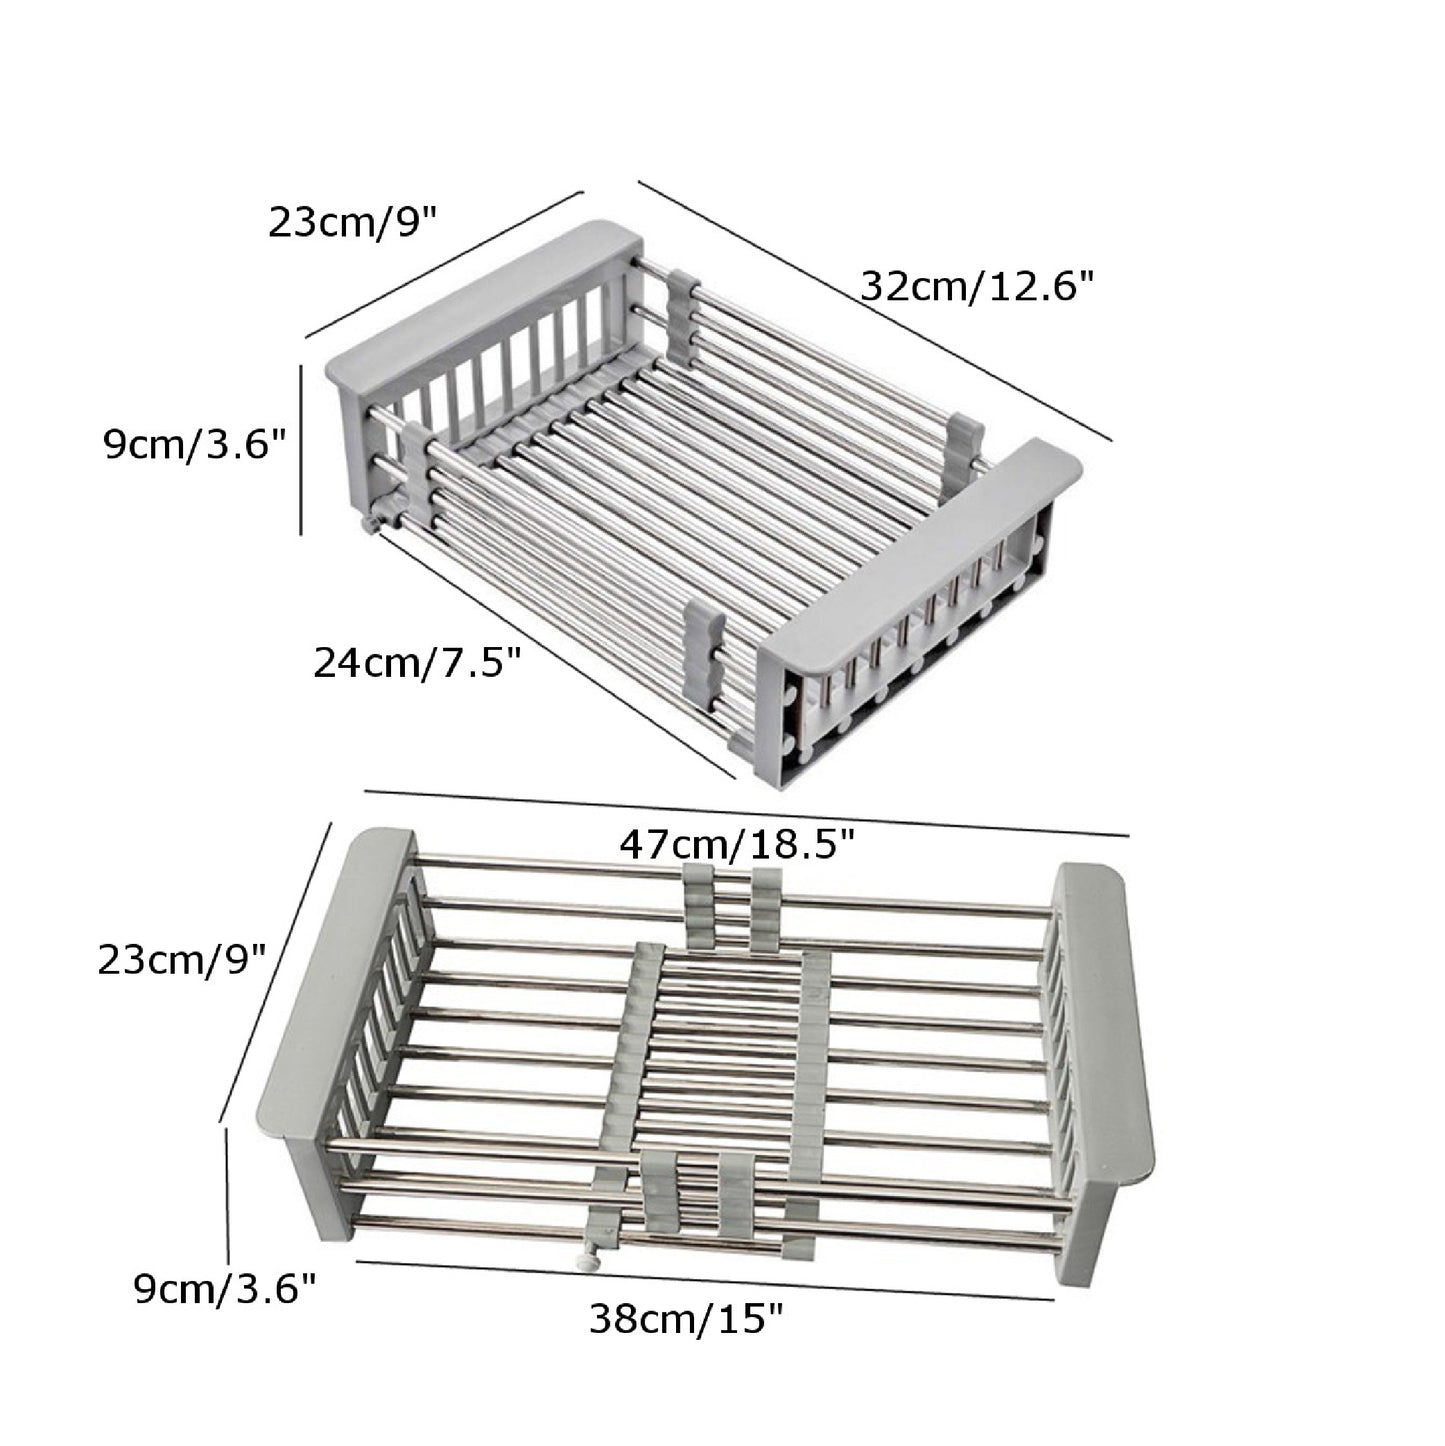 Mcoco Adjustable Drainer Tray For Plates & Cups Dimension 23cm x 9cm x 24-38cm Stainless Steel  - SPDT